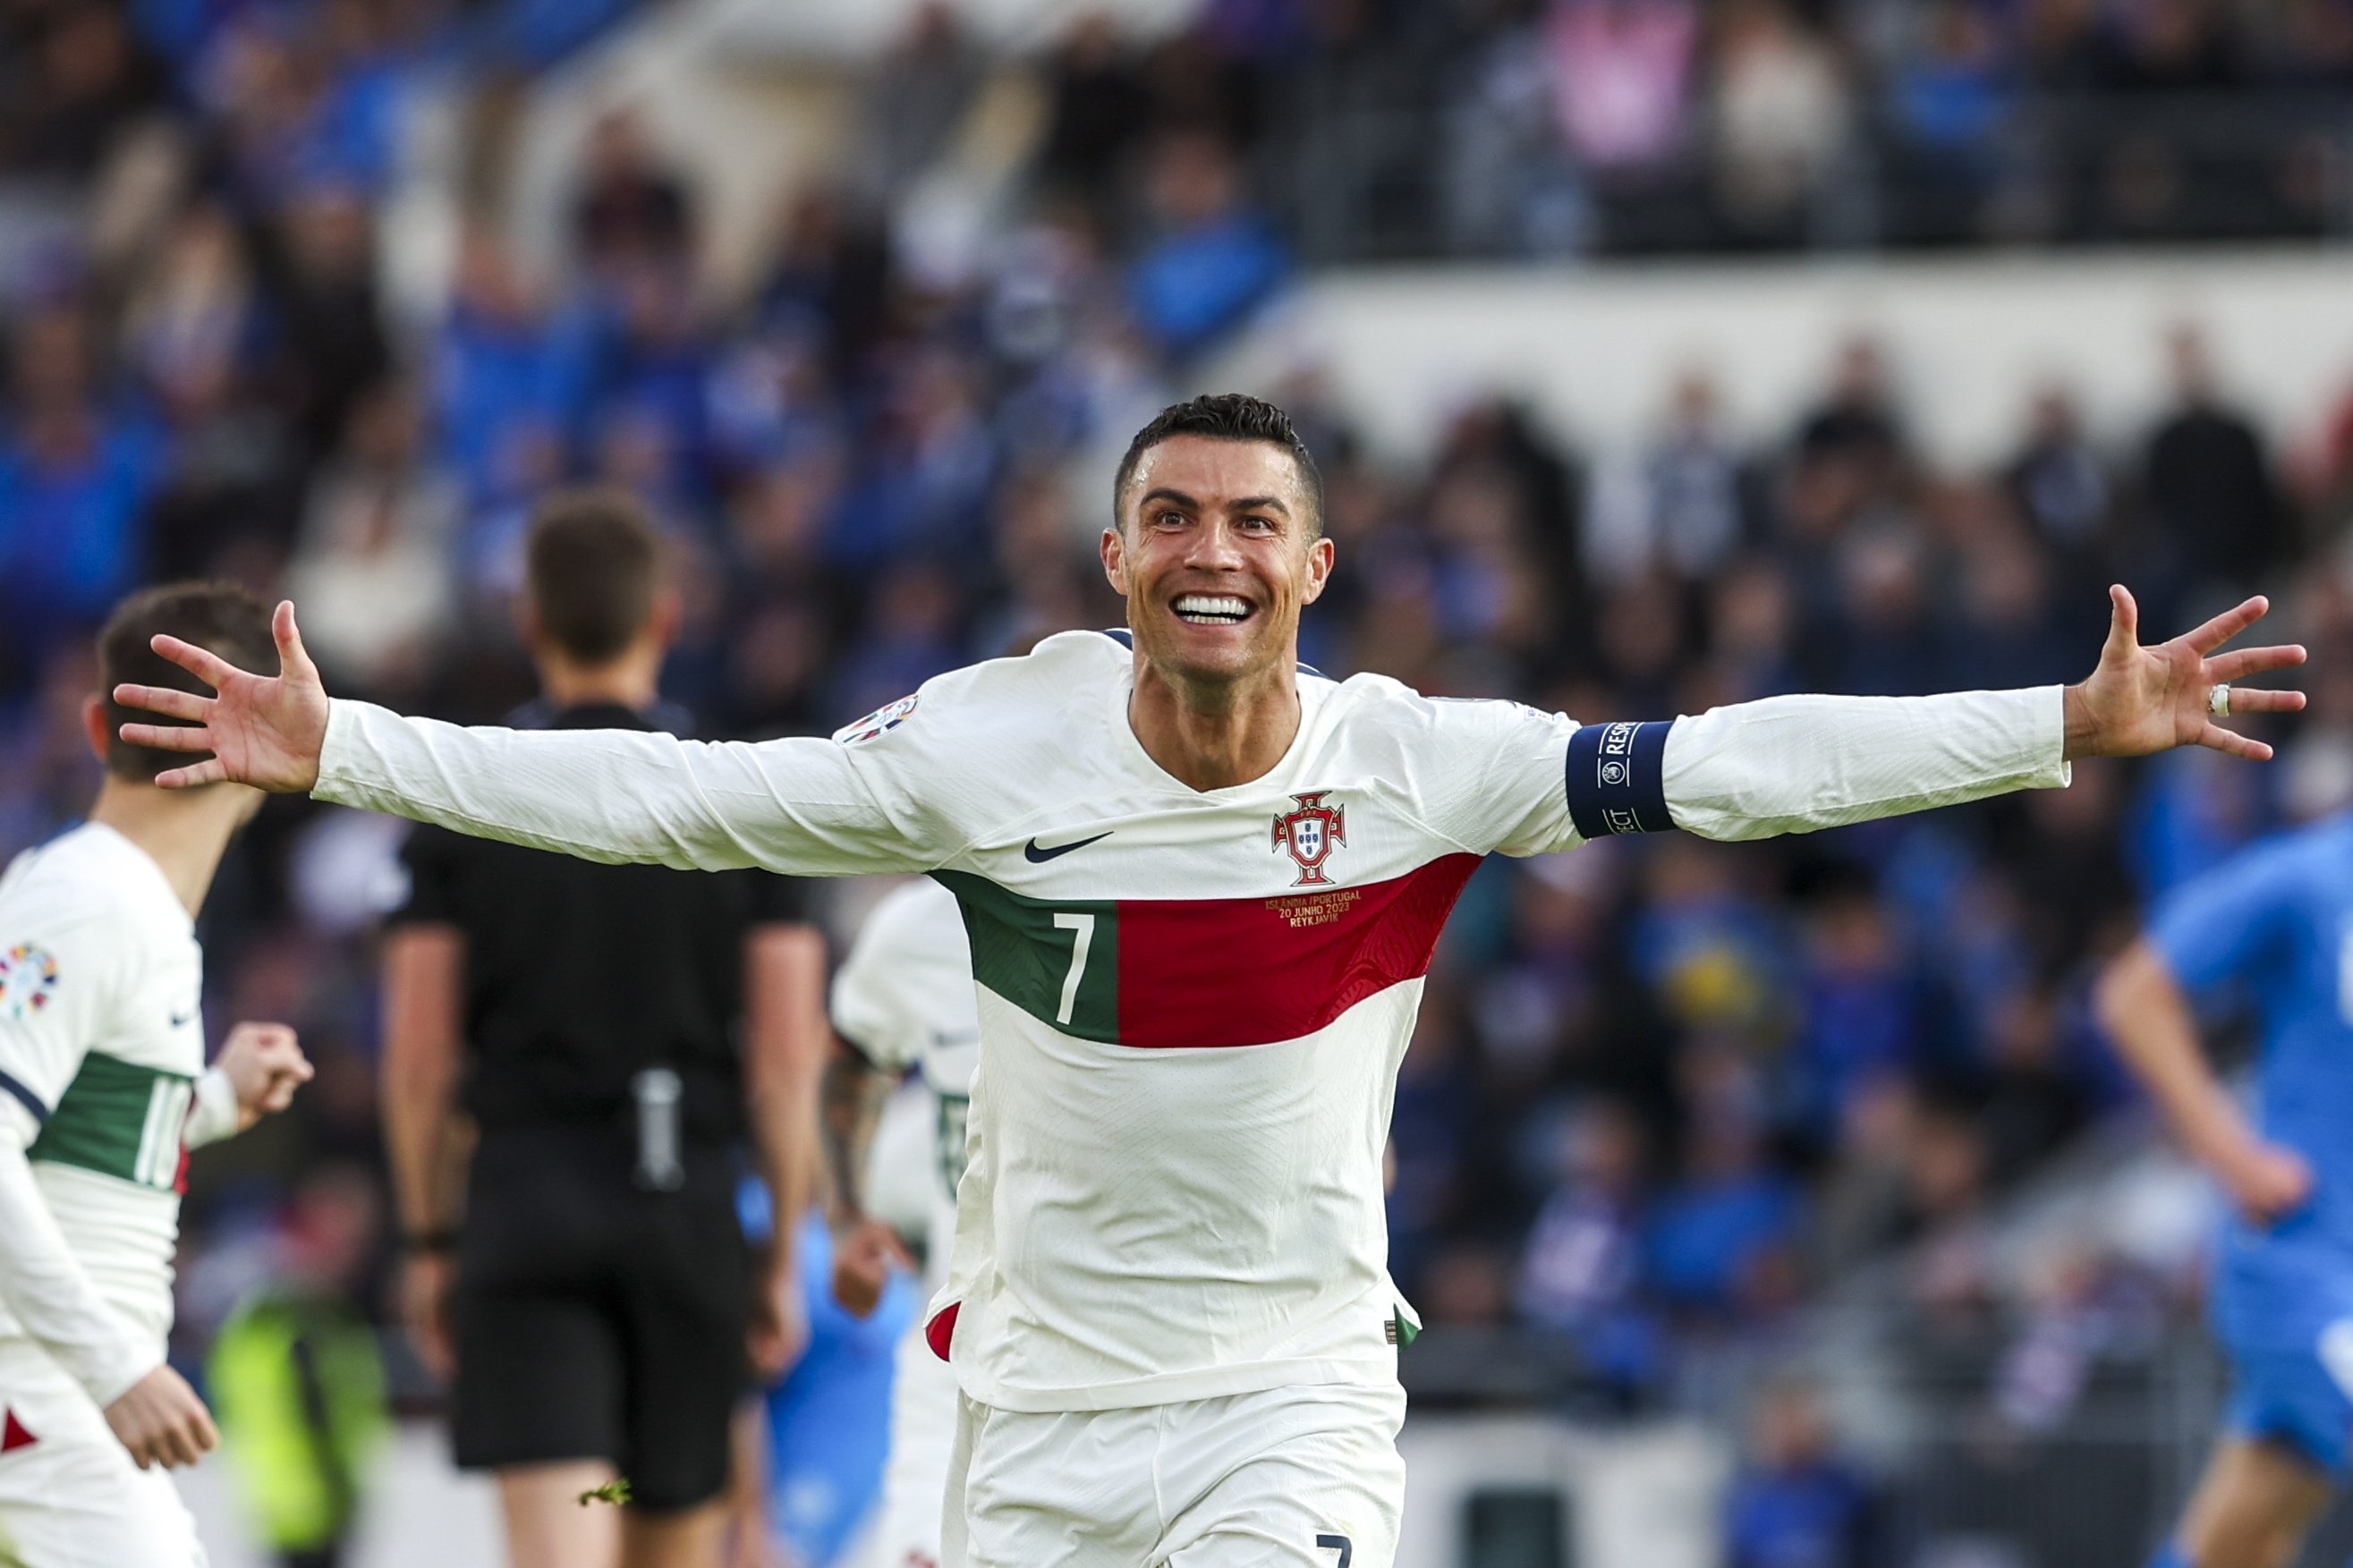 Portugal's Cristiano Ronaldo celebrates a goal during the UEFA Euro 2024 qualifying match between Iceland and Portugal, at Laugardalsvollur Stadium, Reykjavik, Iceland, June 20, 2023. (EPA Photo)